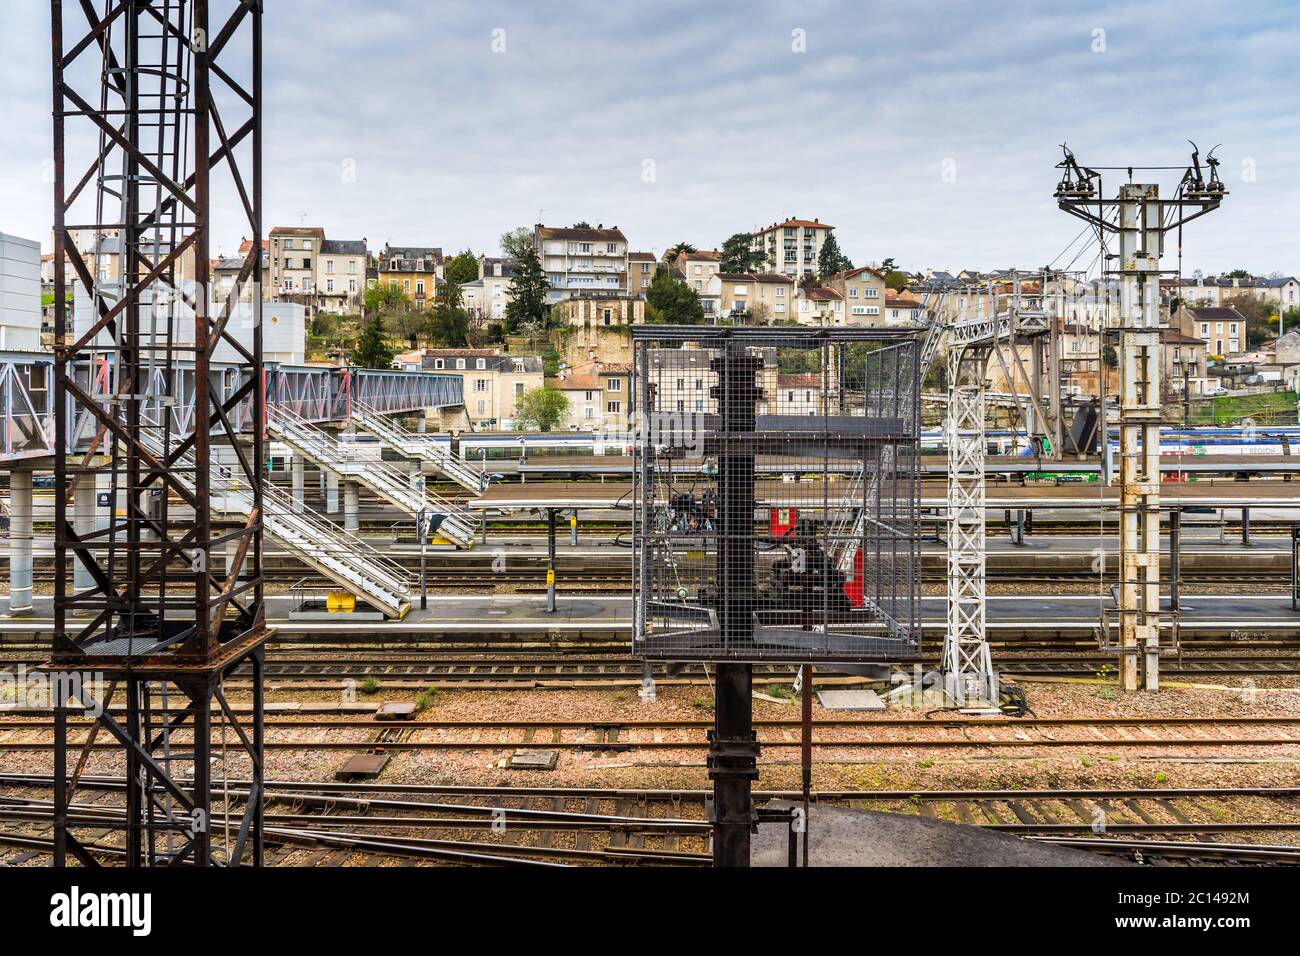 Overhead view of railway station platforms, tracks and equipment - Poitiers, Vienne, France. Stock Photo